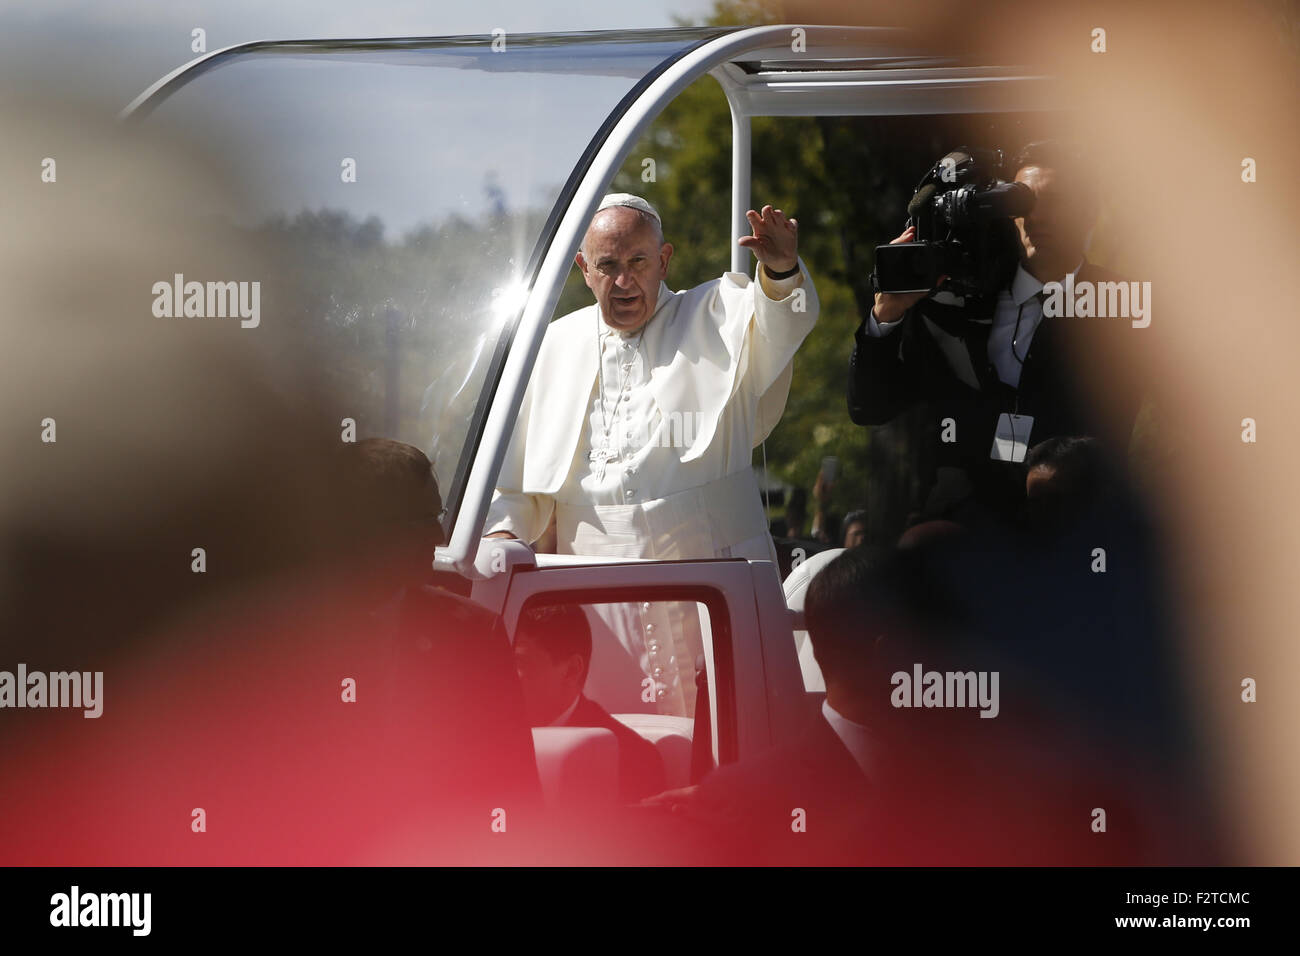 Washington, District of Columbia, USA. 23rd Sep, 2015. POPE FRANCIS waves from the popemobile during a parade as thousands of people gather at the National Mall. The Pope begins his first trip to the United States at the White House followed by a visit to St. Matthew's Cathedral, and will then hold a Mass on the grounds of the Basilica of the National Shrine of the Immaculate Conception. Credit:  Oliver Contreras/ZUMA Wire/Alamy Live News Stock Photo